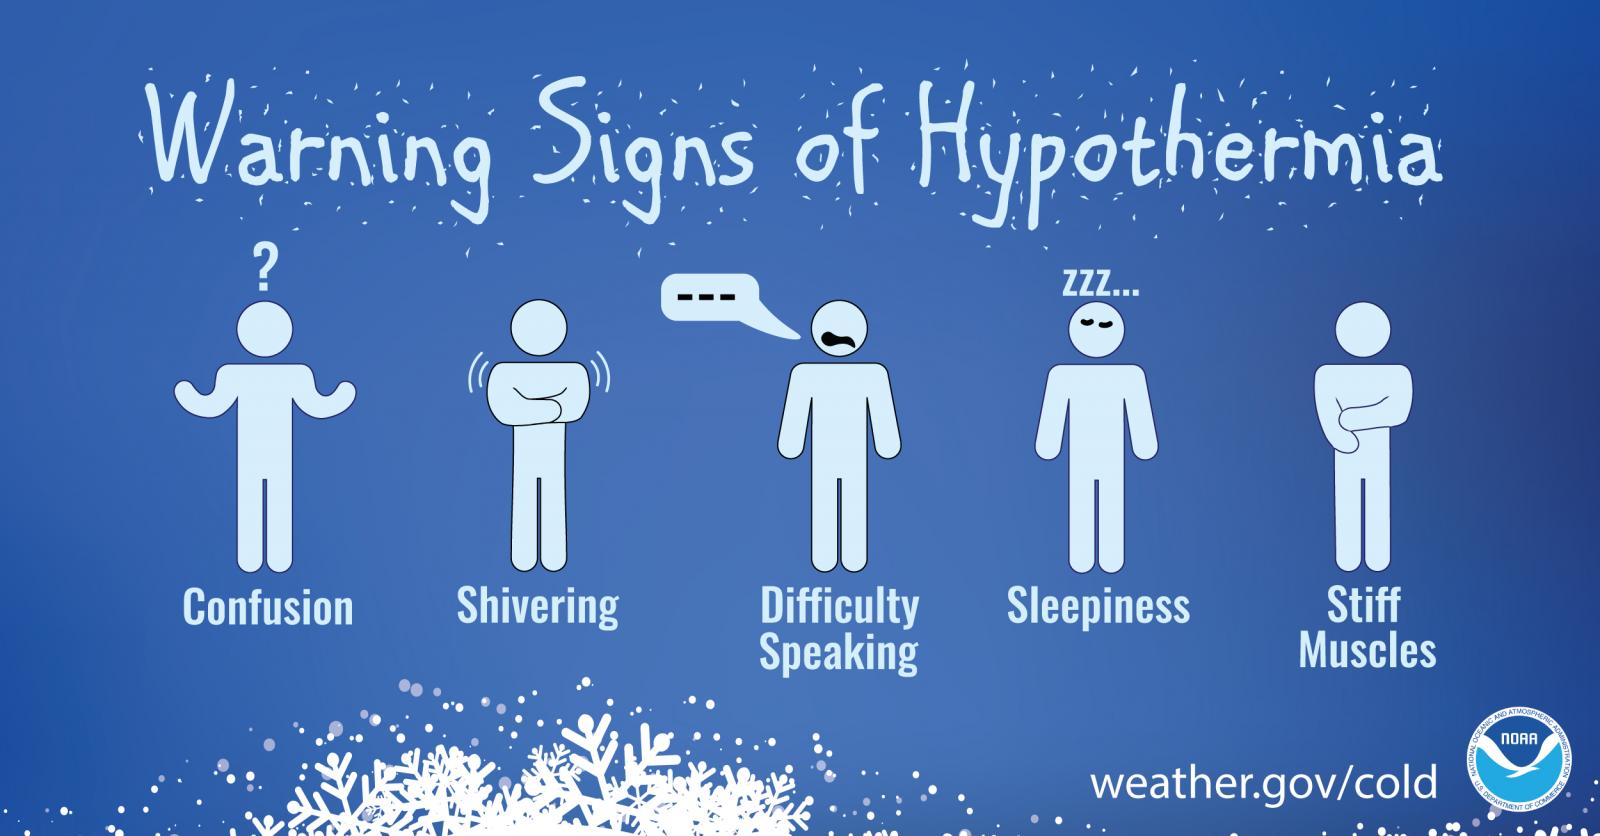 Warning signs of hypothermia information